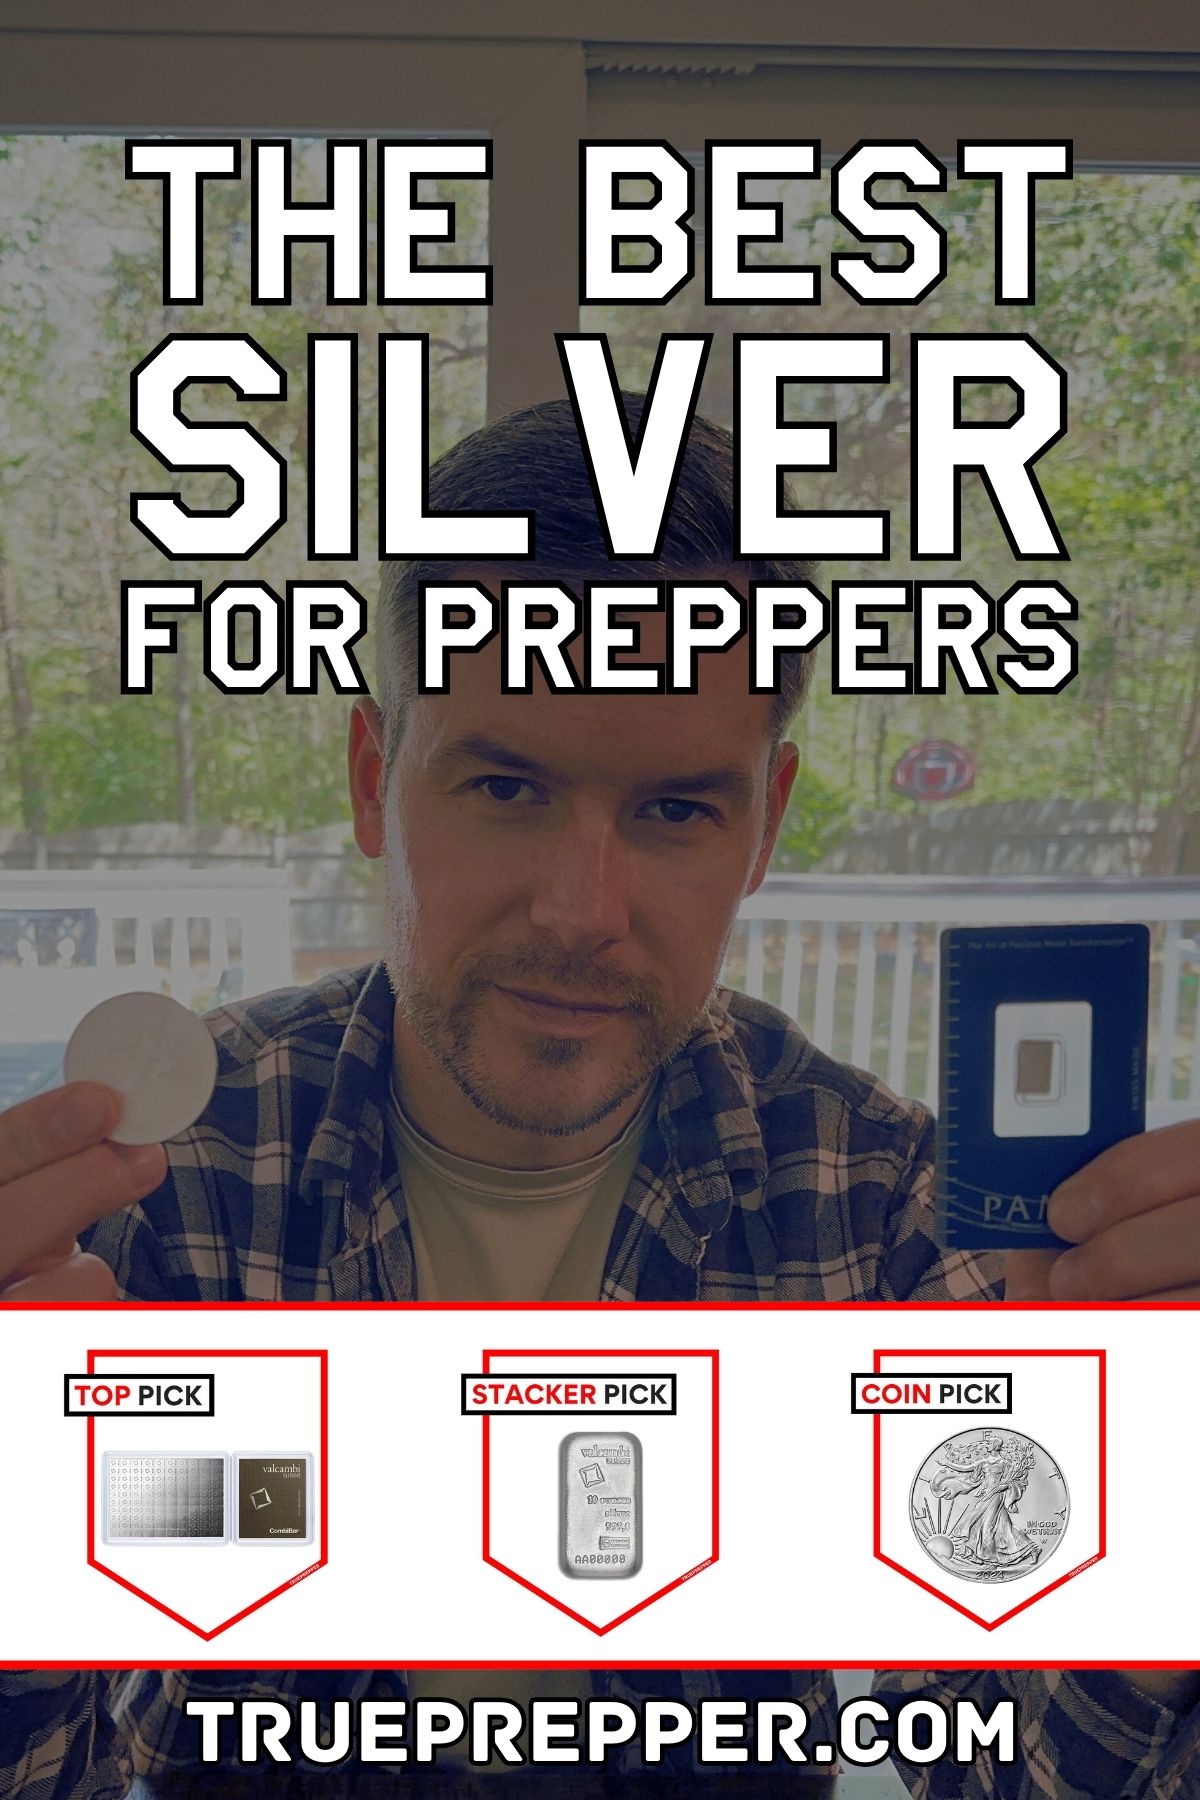 The Best Silver for Preppers